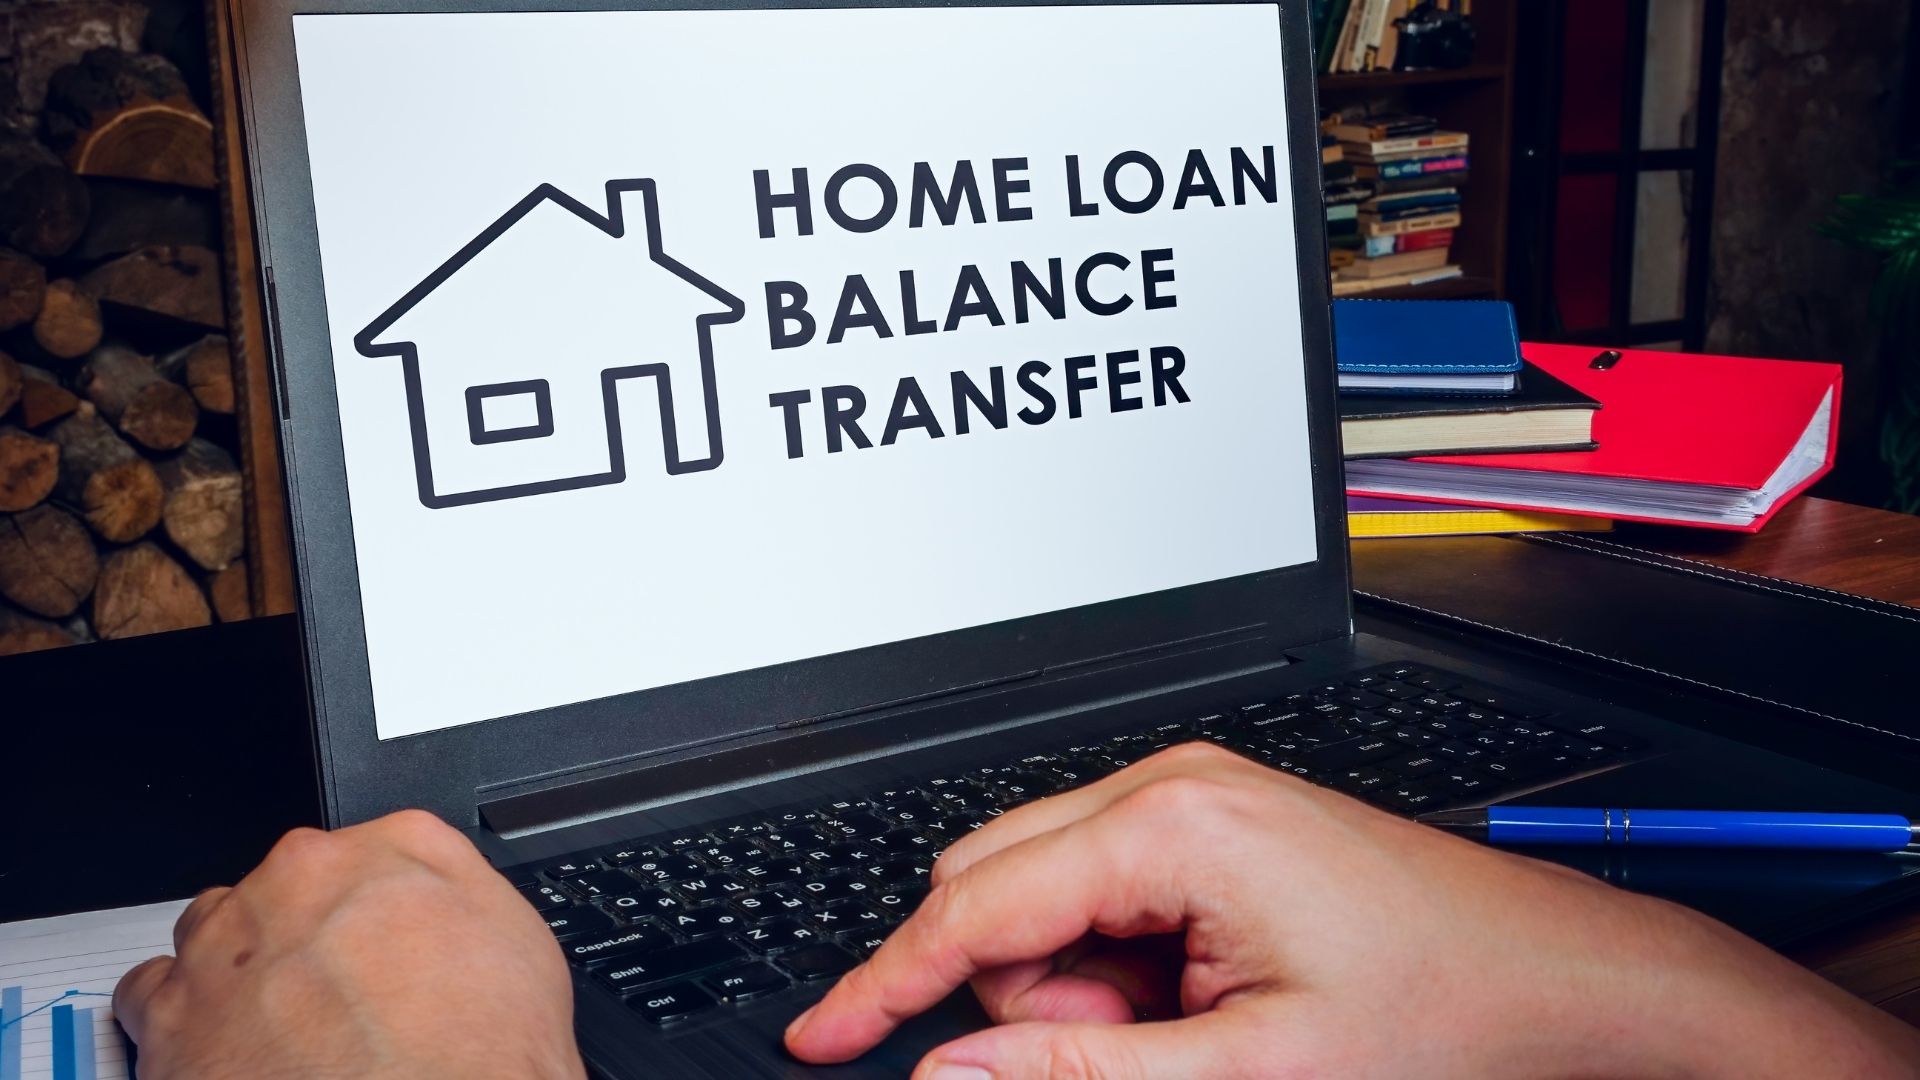 Is your Home Loan Balance Transfer Decision Right in COVID Times? Check this out!